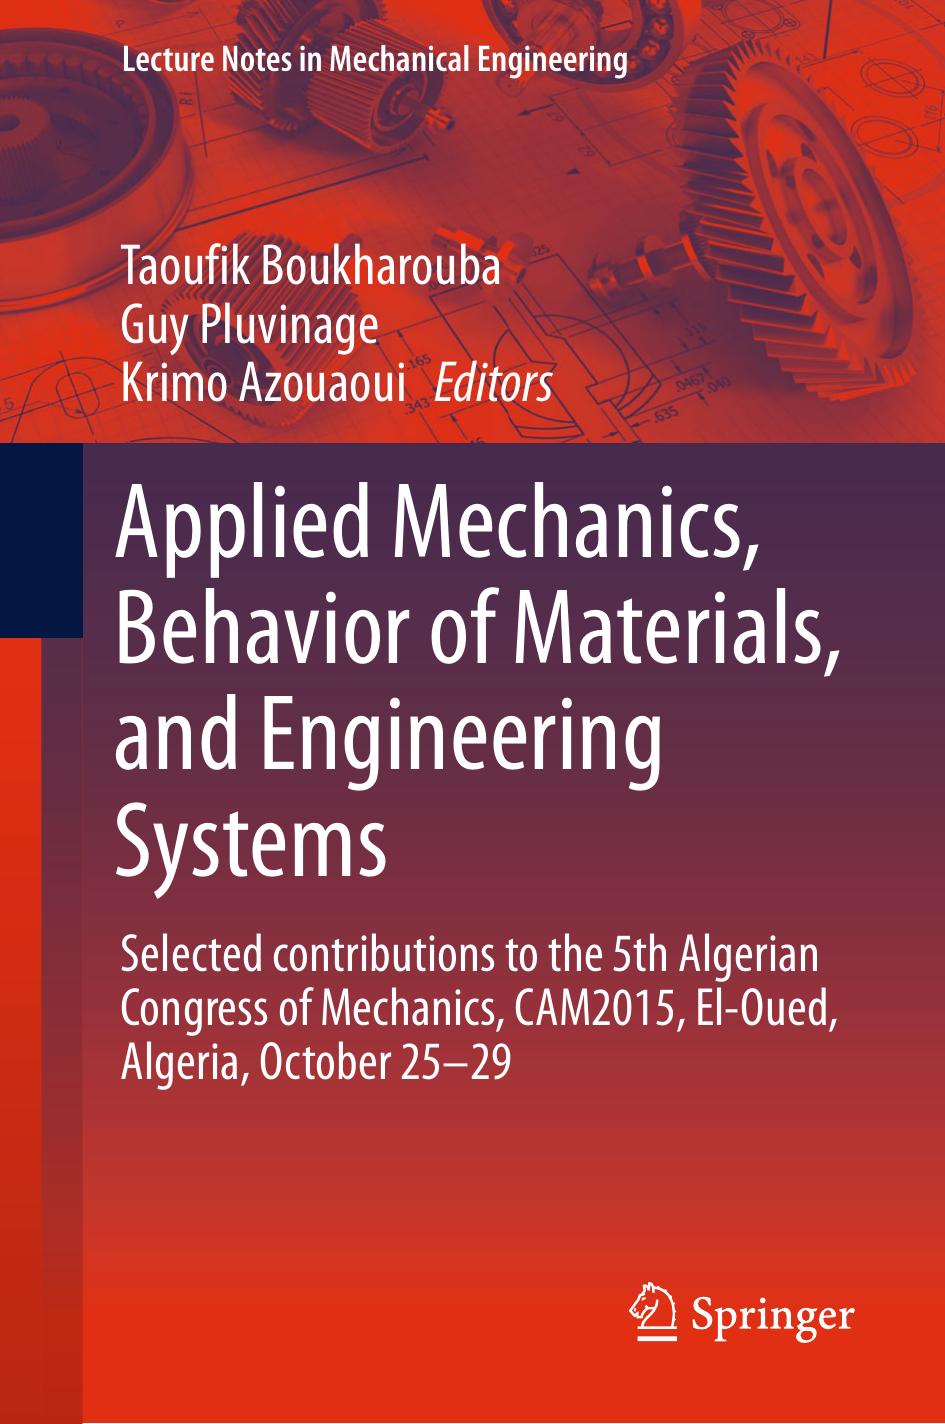 Applied Mechanics, Behavior of Materials, and Engineering Systems Selected 2019